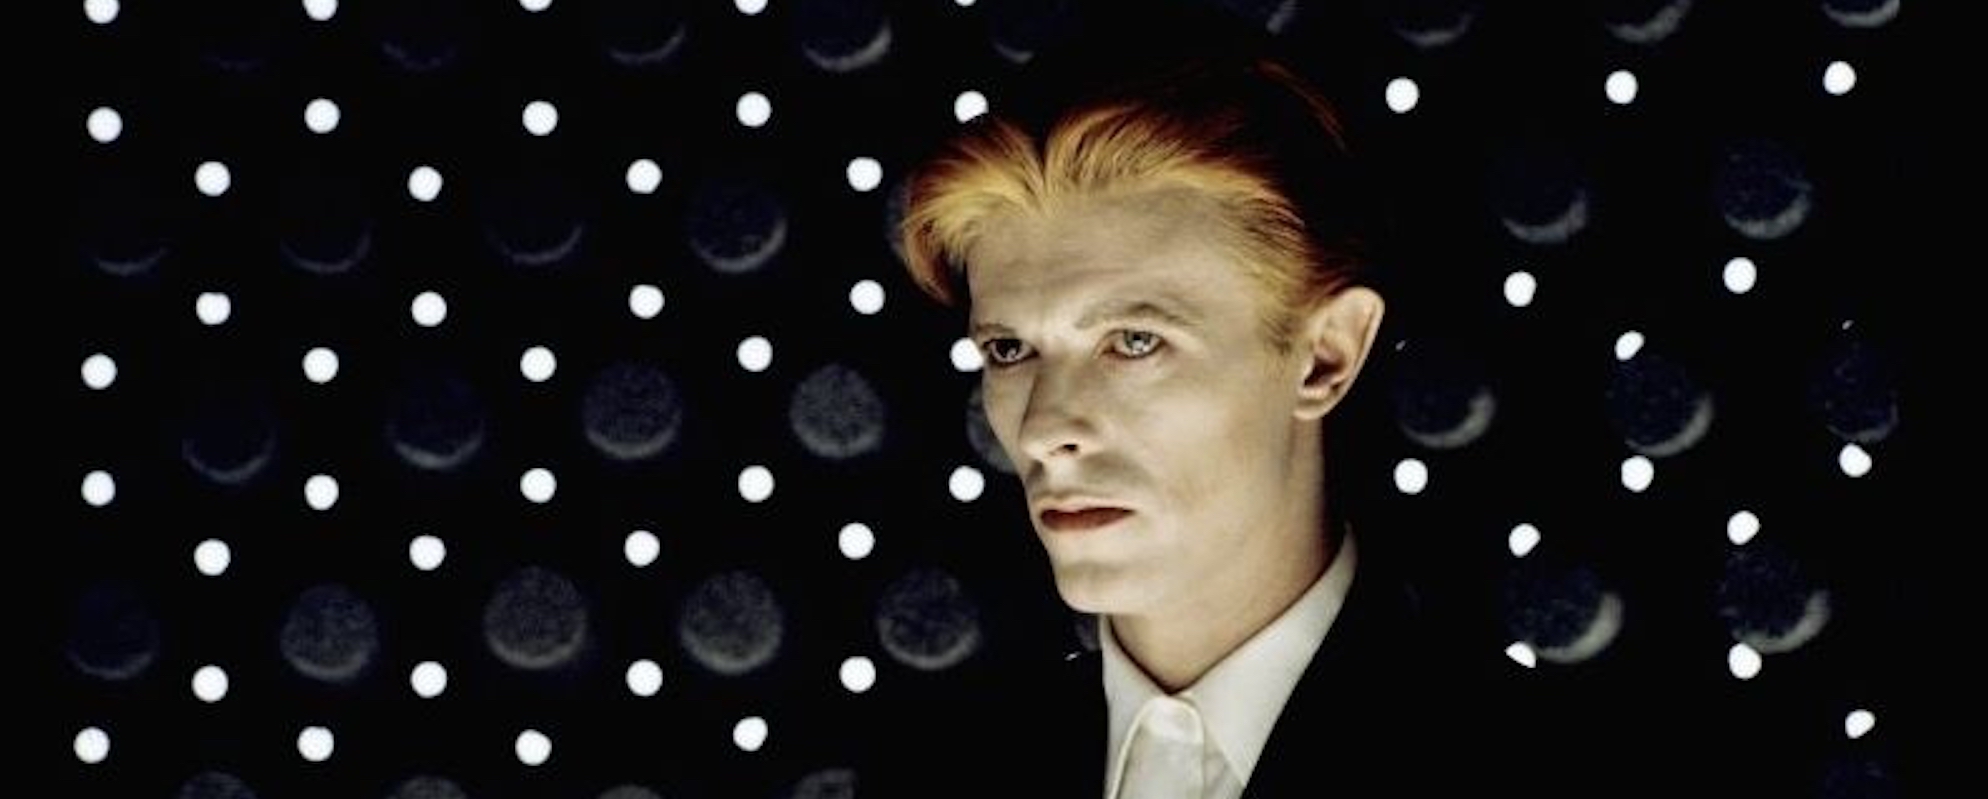 New David Bowie Triple LP Out Today; Livestream Set for His Would-Be 75th Birthday Saturday